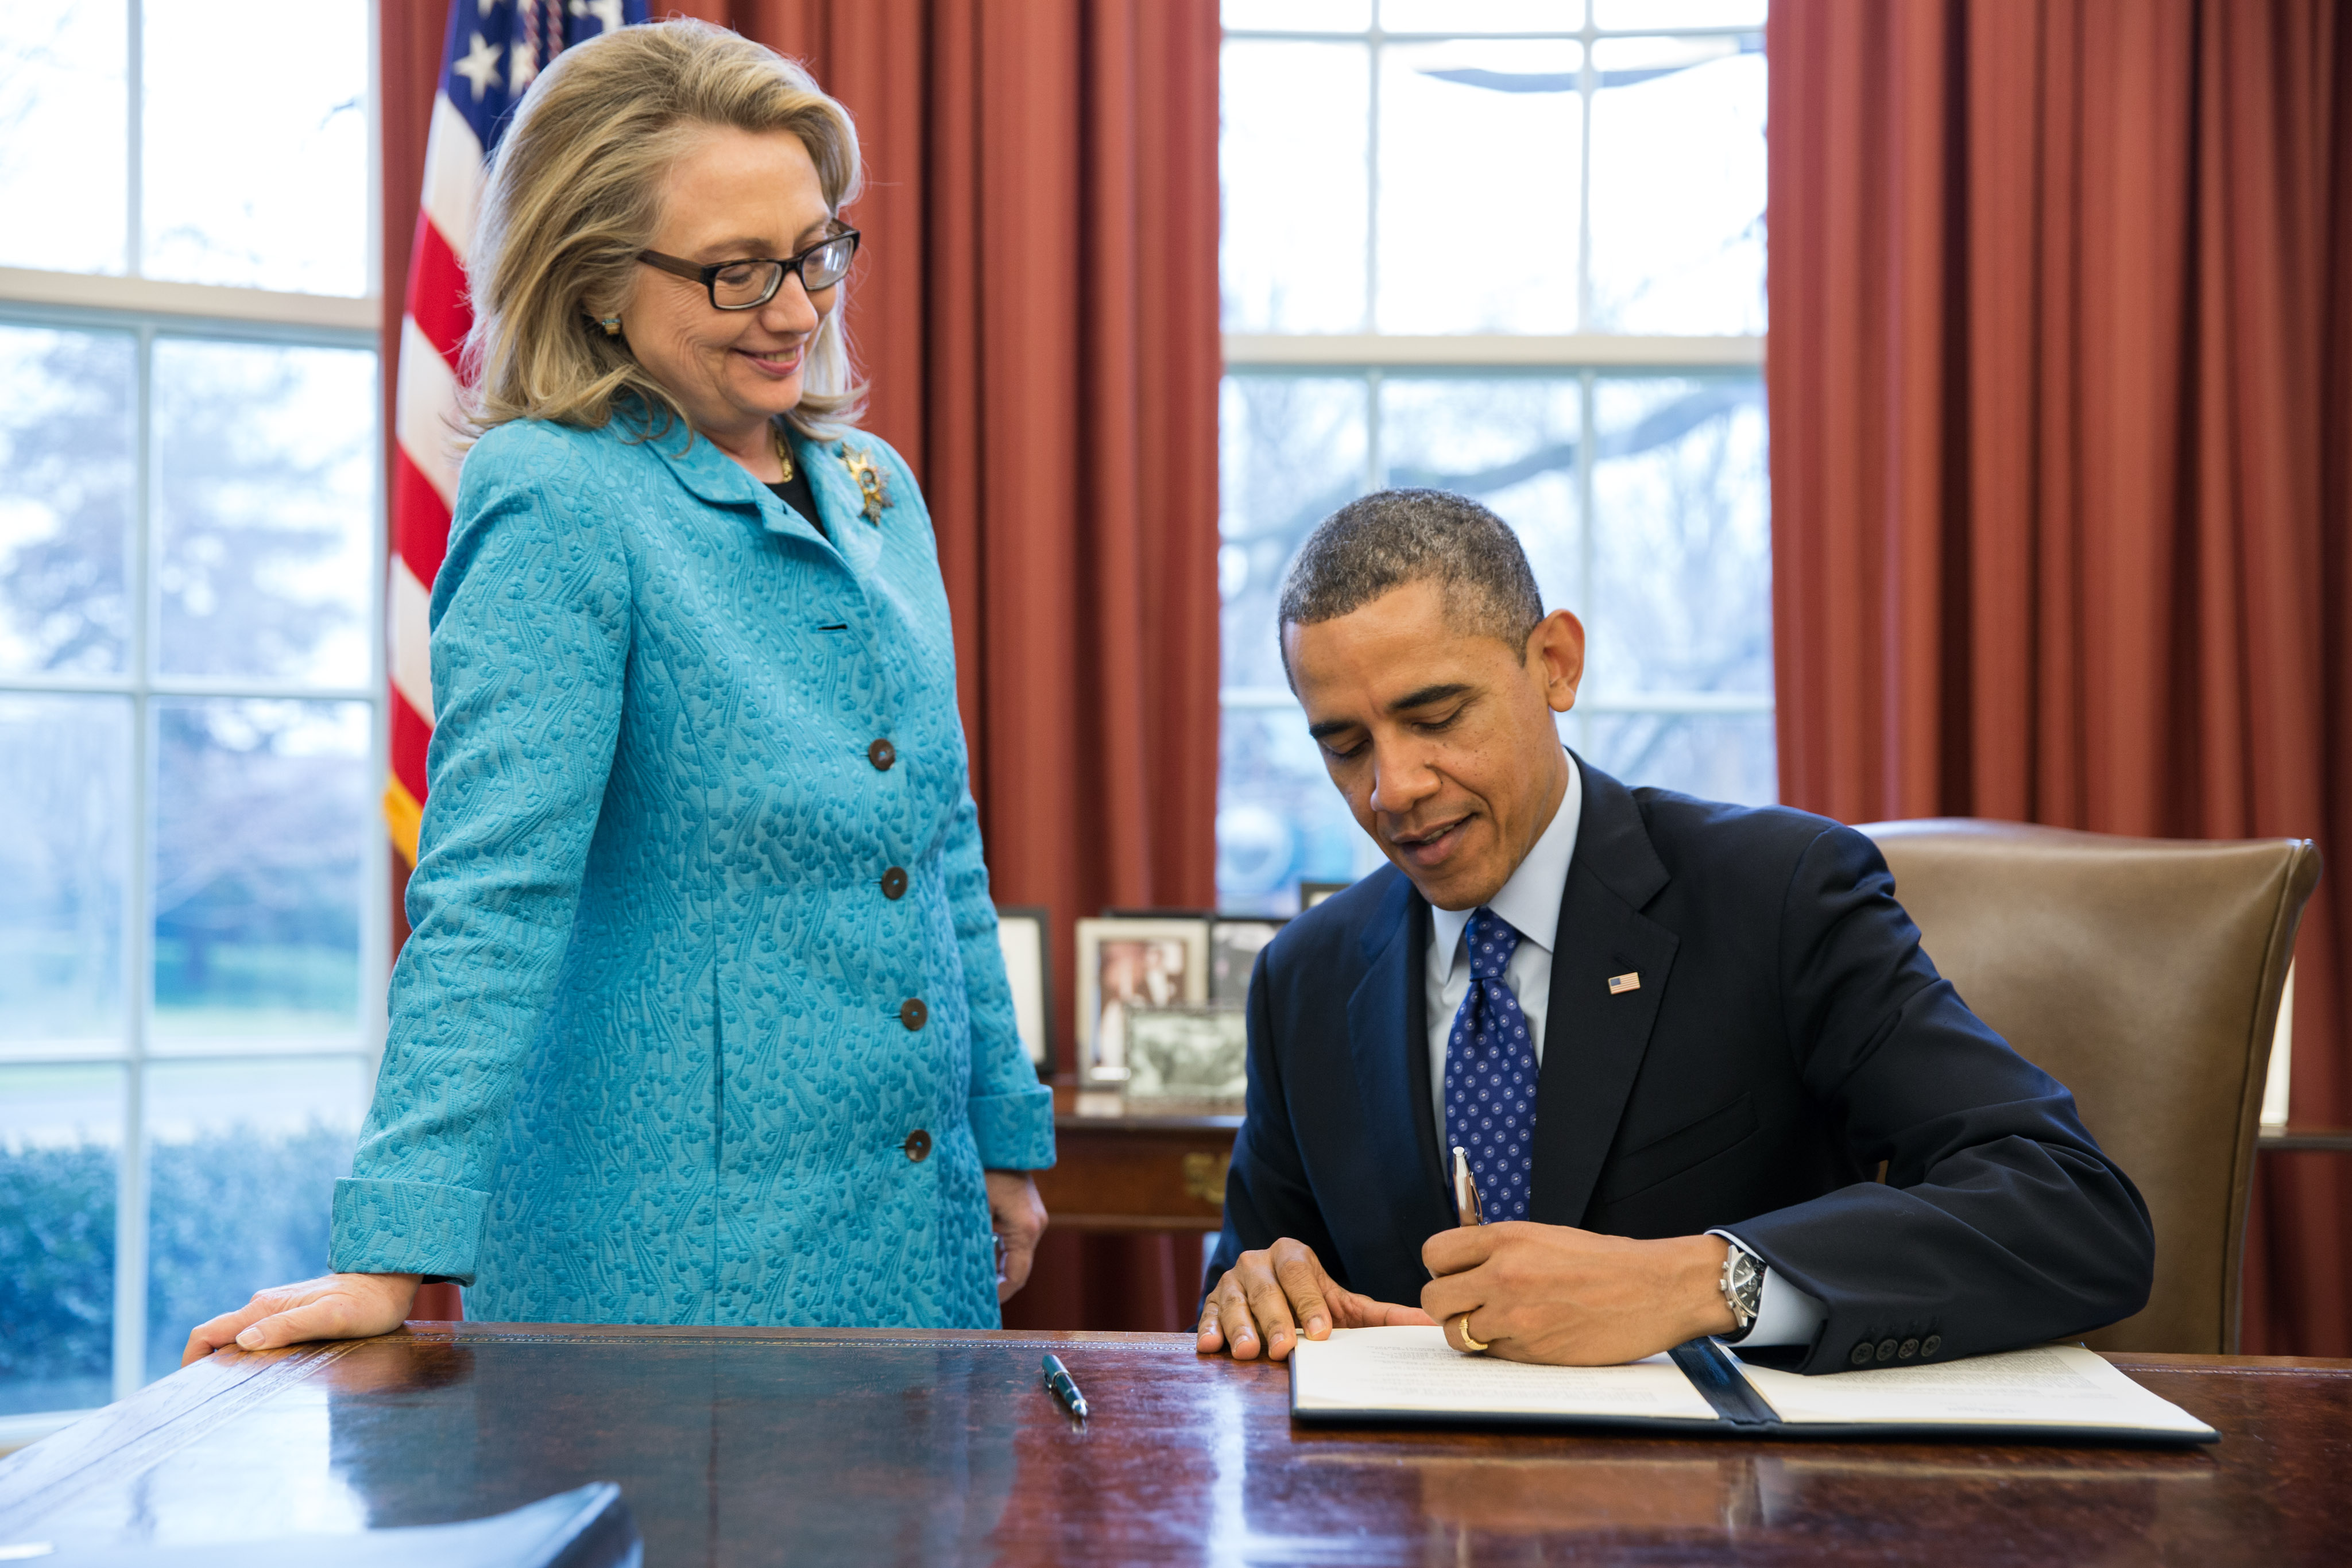 Secretary of State Hillary Clinton watches as President Obama signs a Presidential memorandum (January 20, 2013)